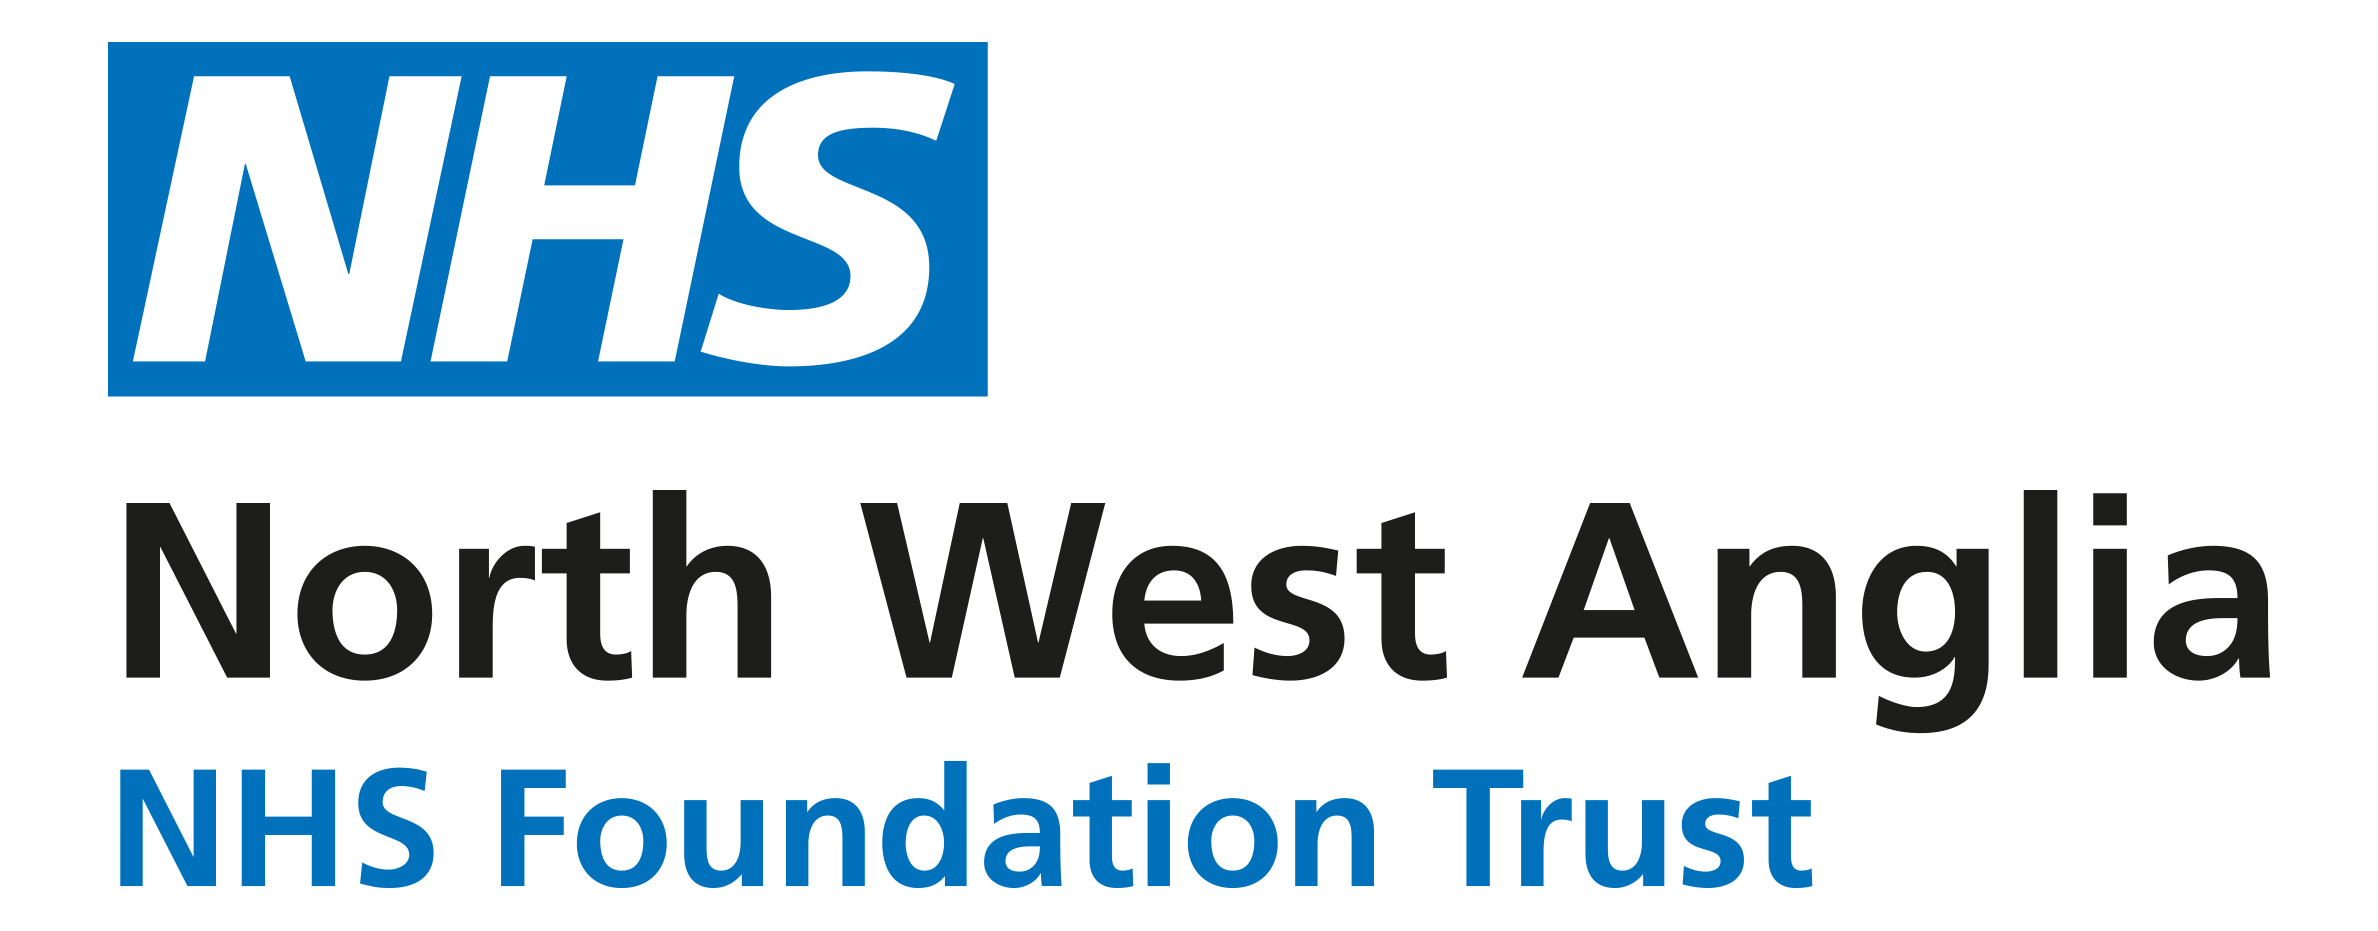 North West Anglia NHS Foundation Trust - Non-Executive Director